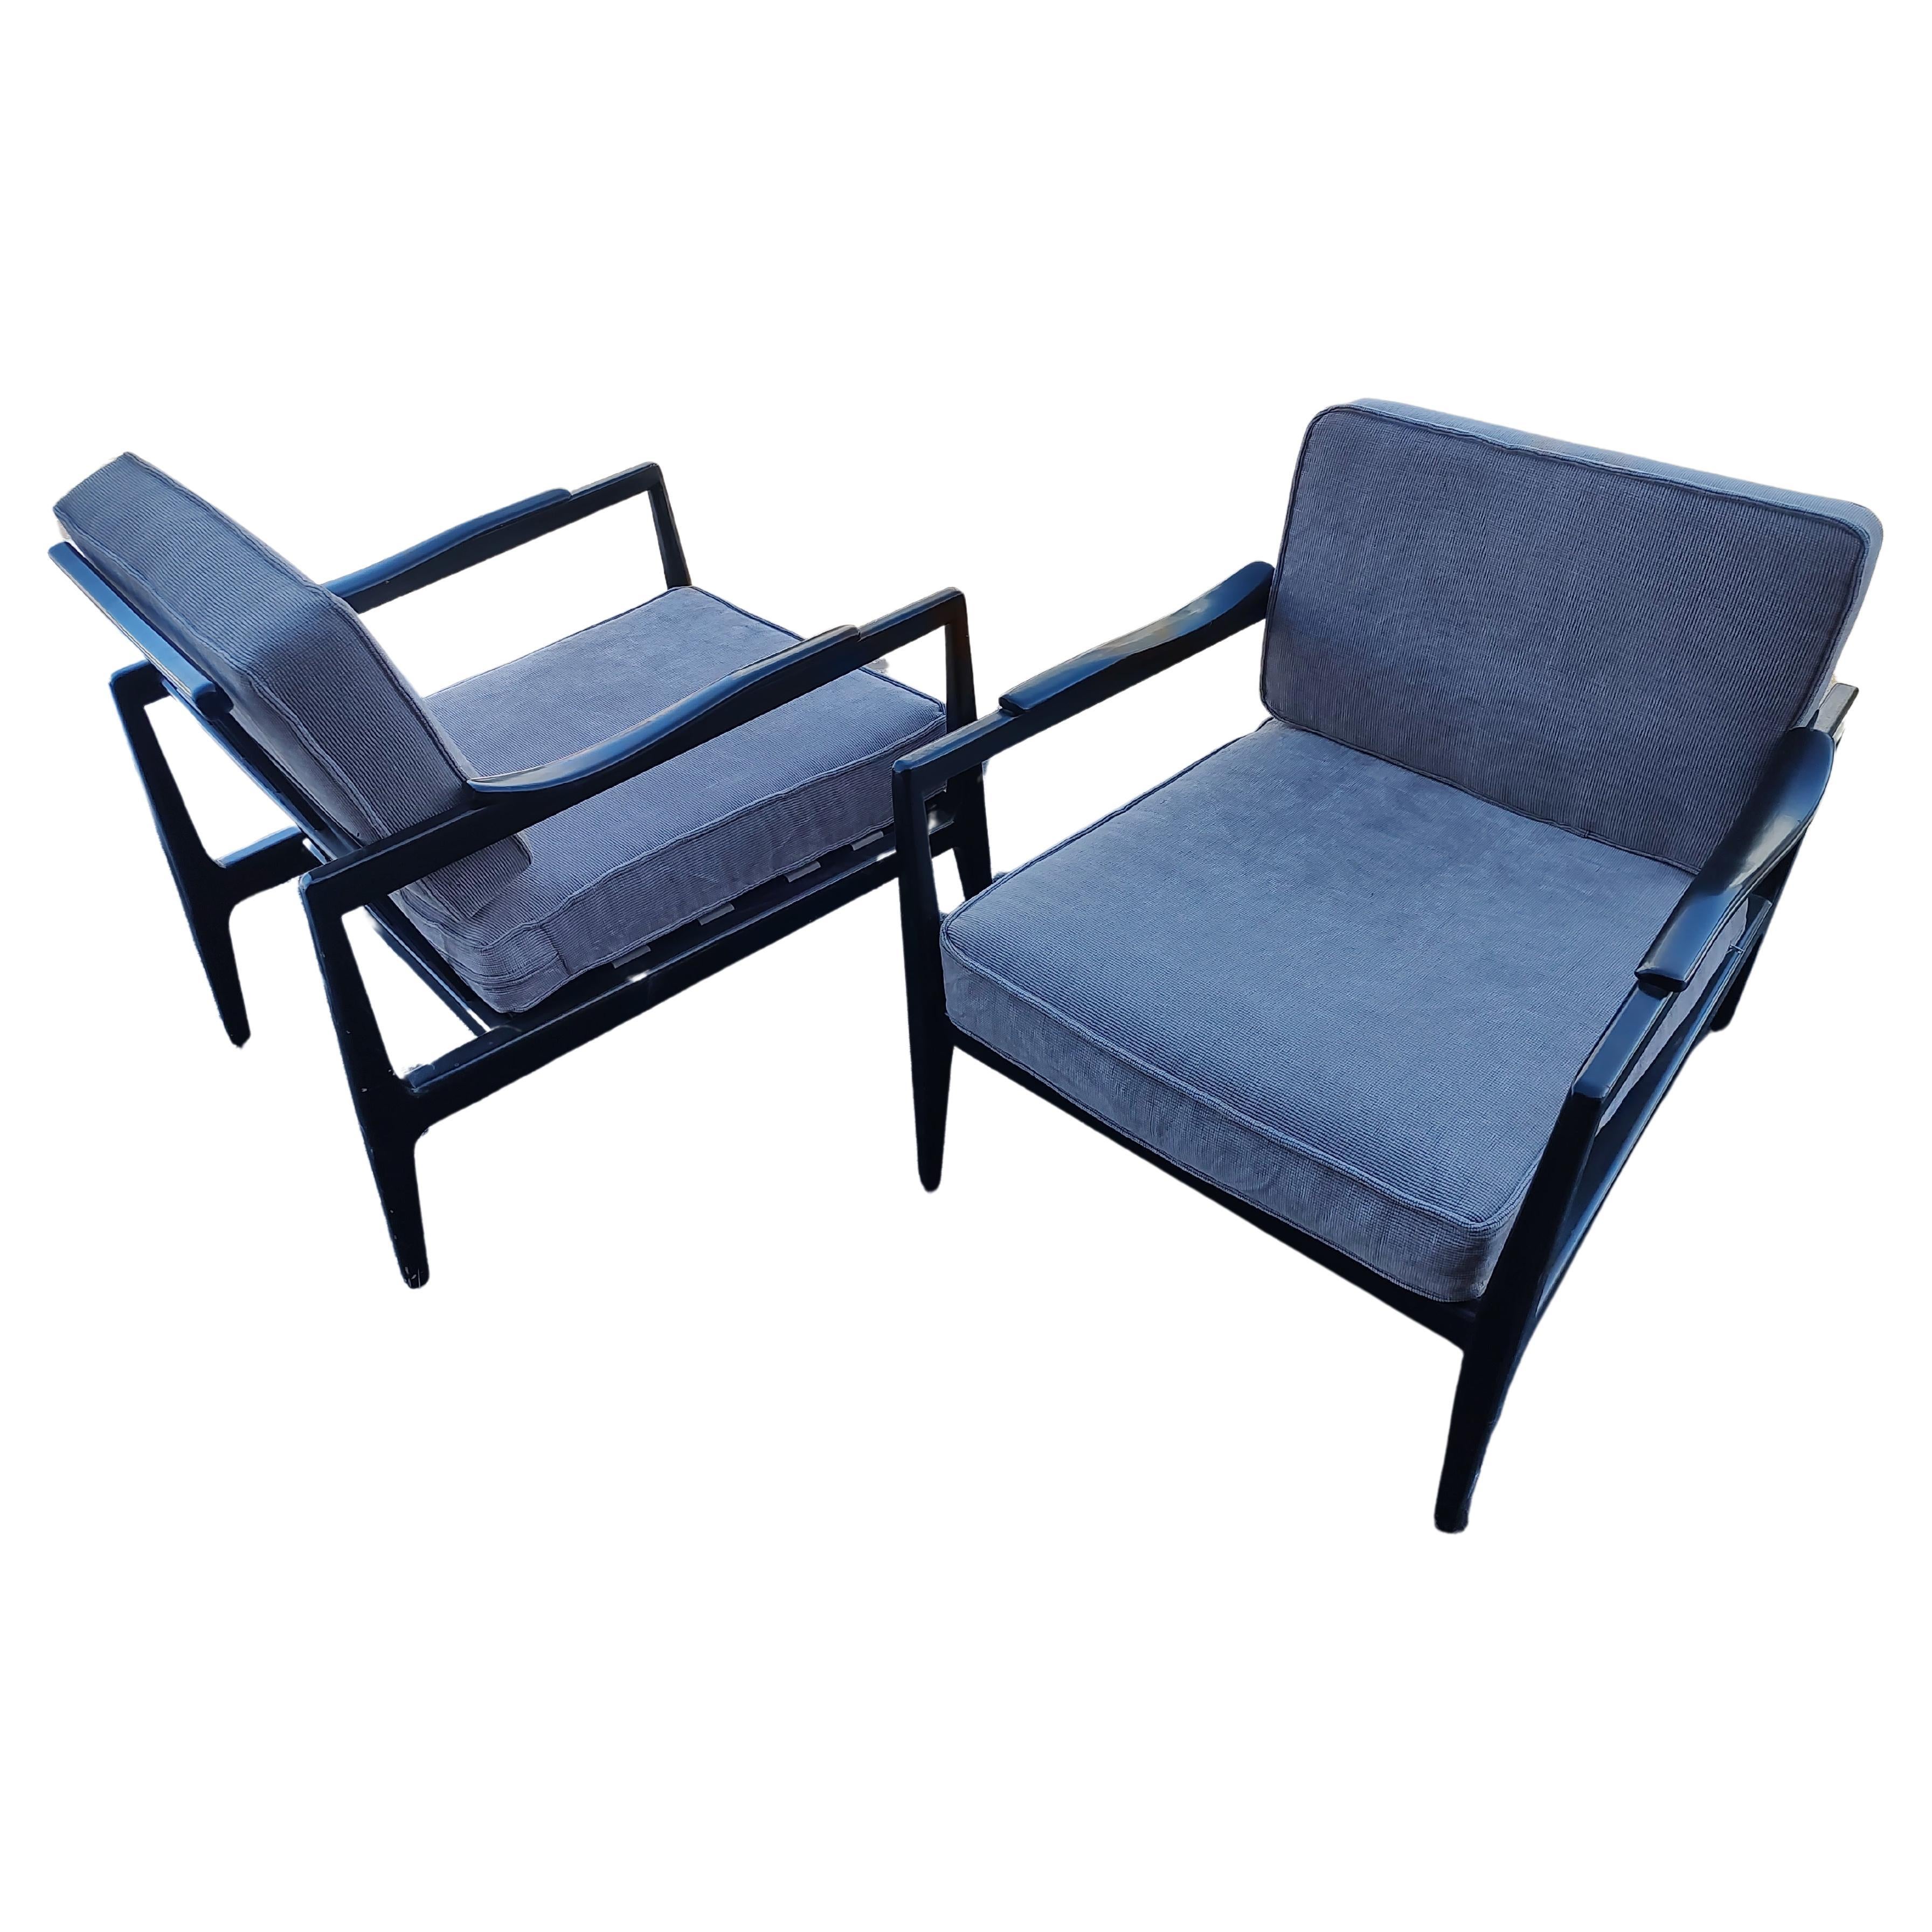 Mid-20th Century Pair of Mid Century Modern Sculptural Lounge Chairs by Edmond Spence For Sale